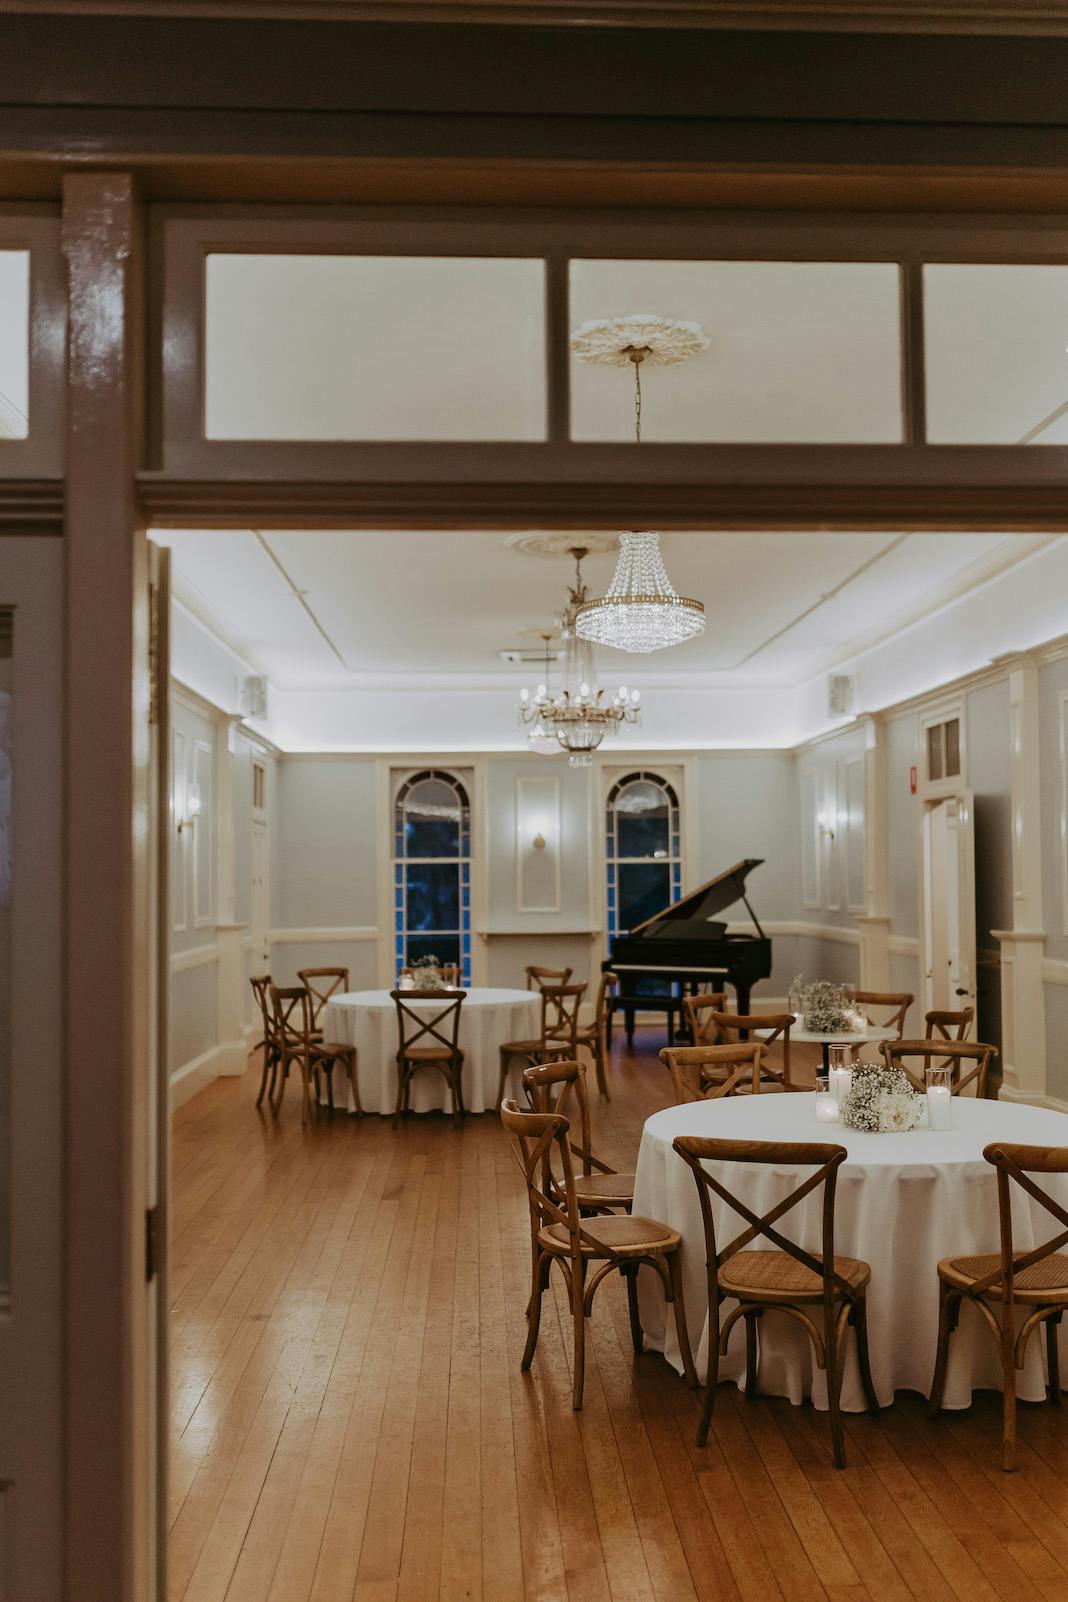 A spacious, elegantly decorated room with wooden floors features several round tables covered with white tablecloths and surrounded by wooden chairs. A black grand piano sits at the back of the room near large arched windows, and crystal chandeliers hang from the ceiling.